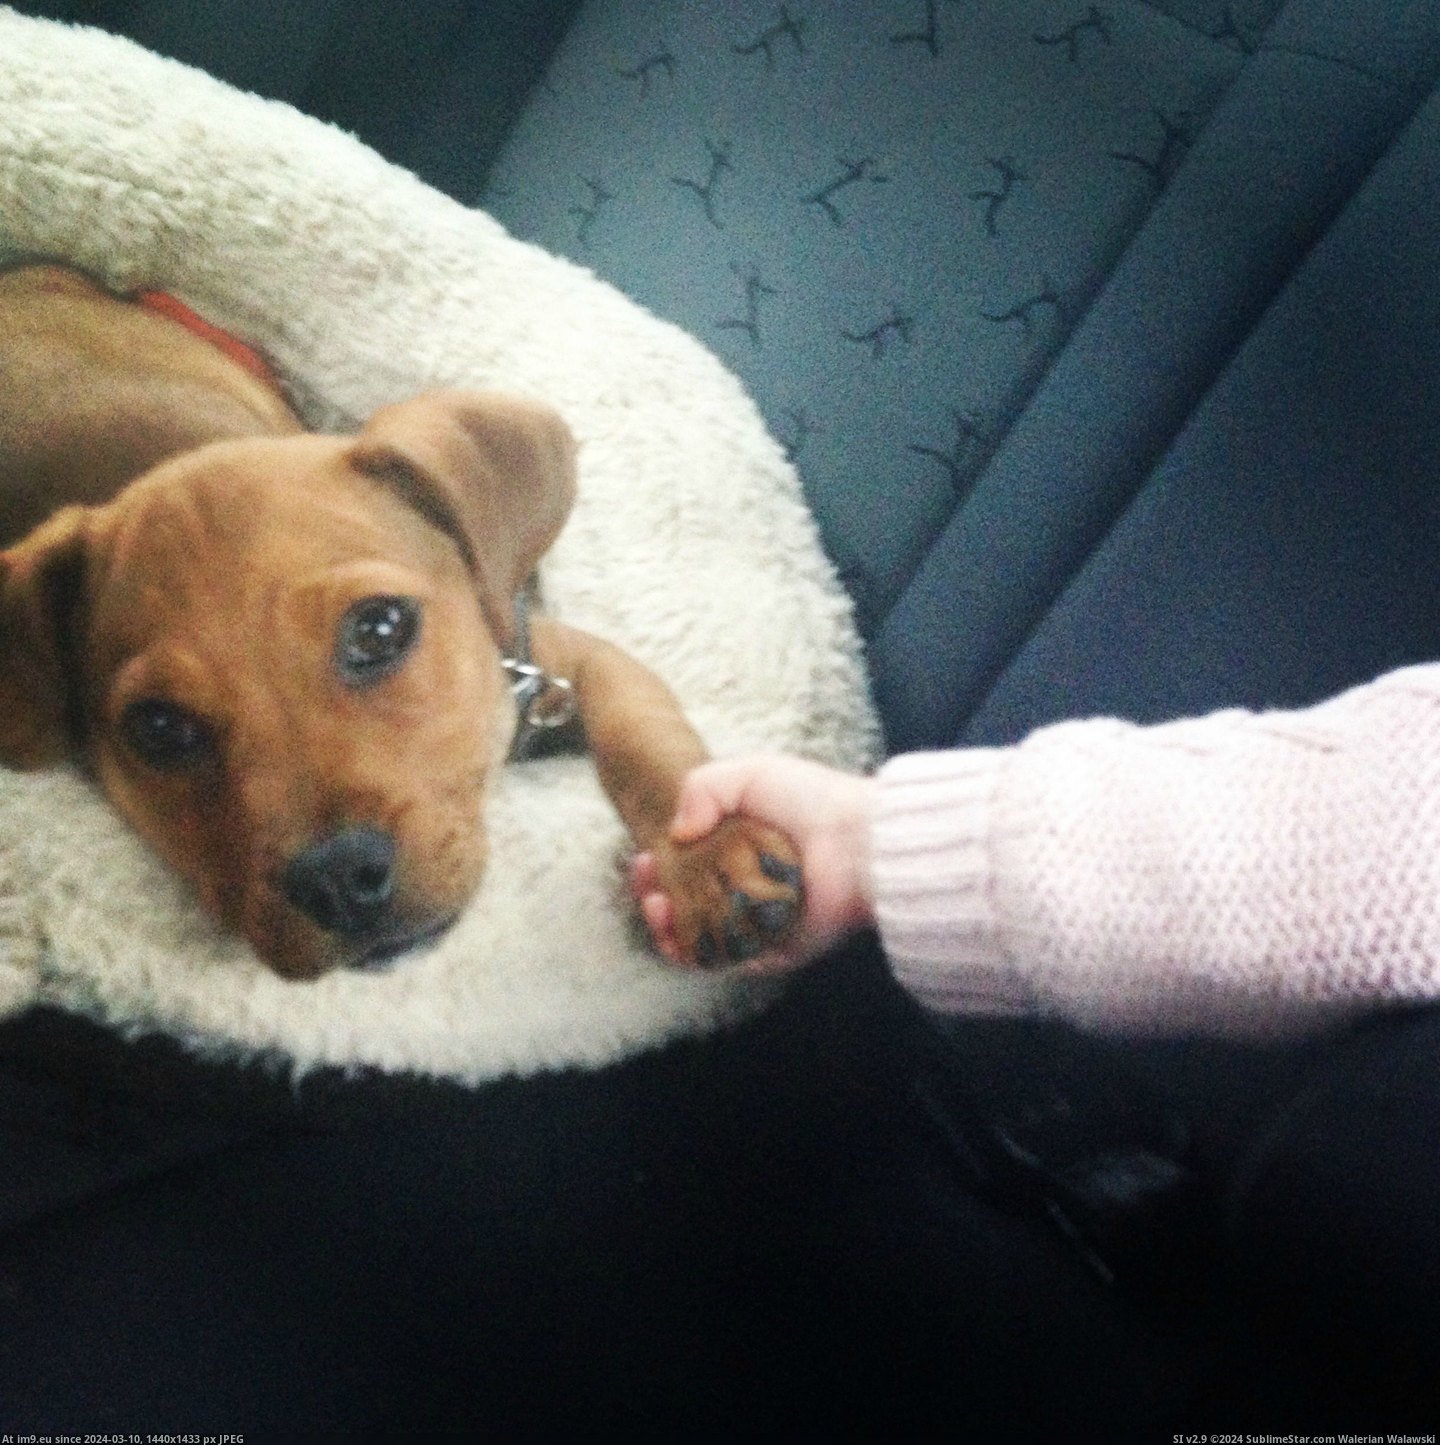 #Thought #Meet #Mad #Mollie #Puggle #Jack #Pup #Toddler [Aww] Everyone thought I was mad getting a puggle pup when I have a toddler already.... everyone meet Mollie and Jack. 11 Pic. (Bild von album My r/AWW favs))